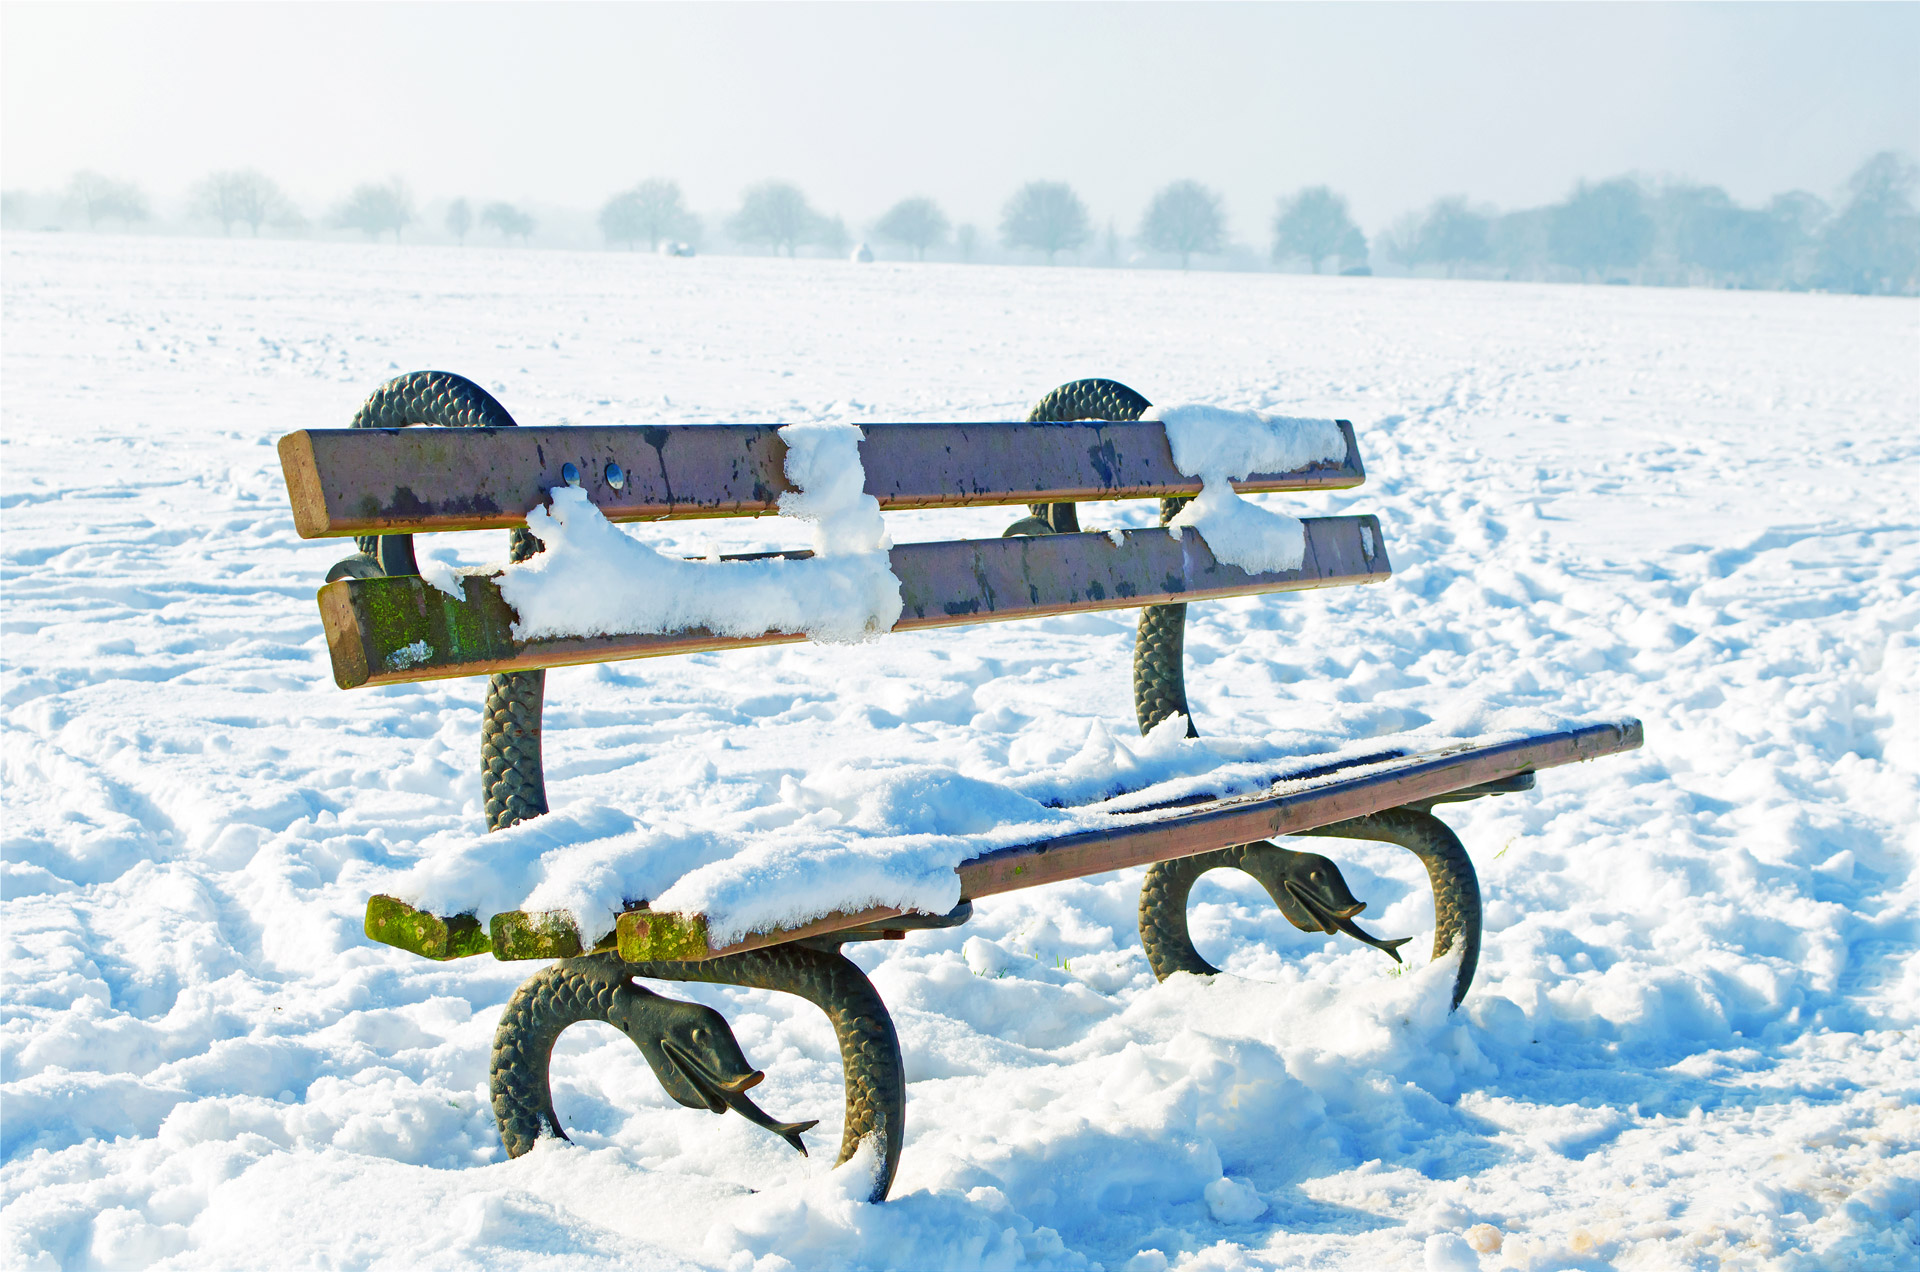 Bench And Snowy Park